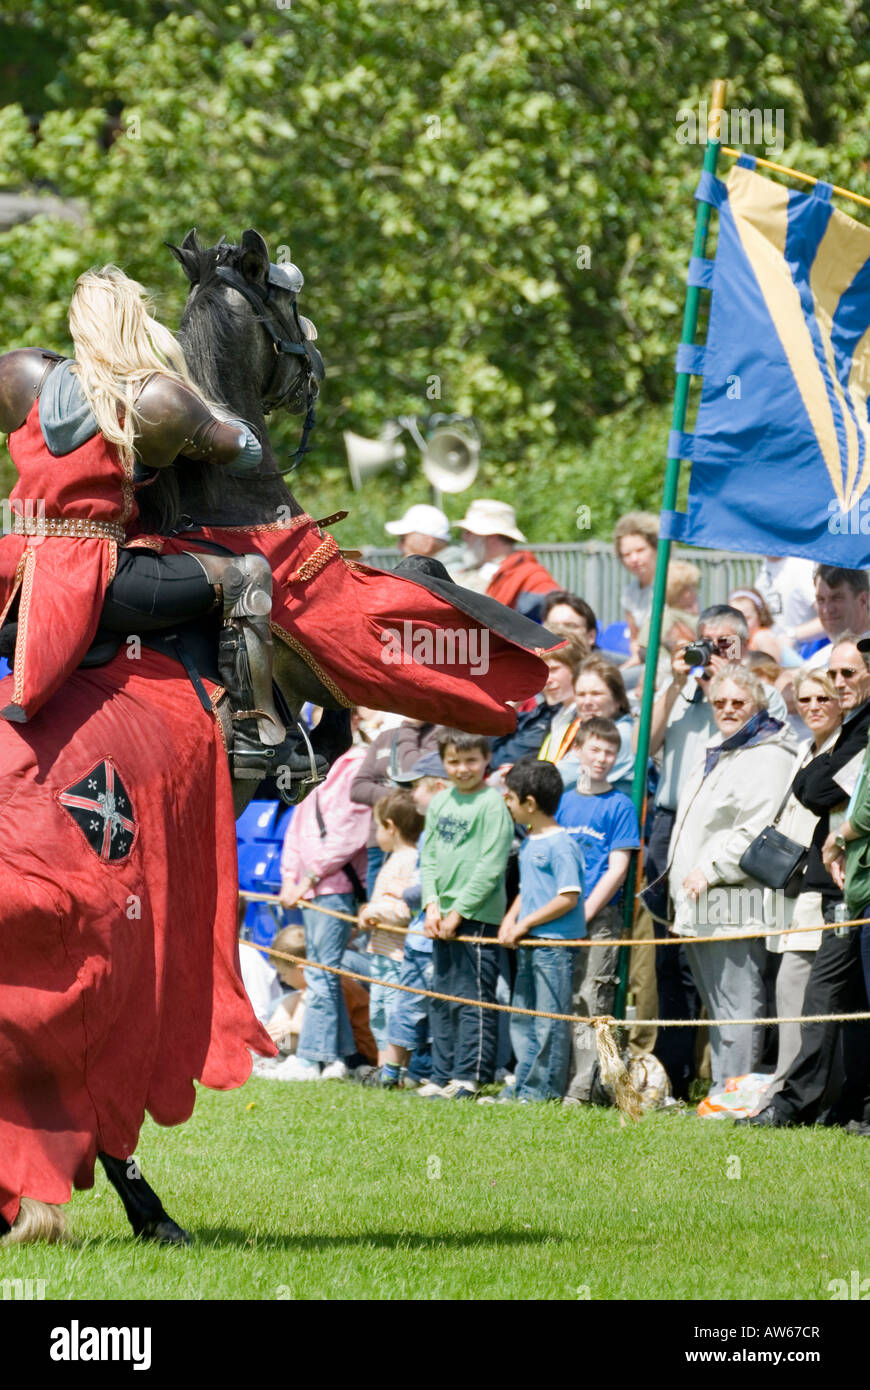 Red Dressed Female Knight on Rearing Horse Entertains Crowds at Tewkesbury Medieval Festival England 2007 NR Stock Photo